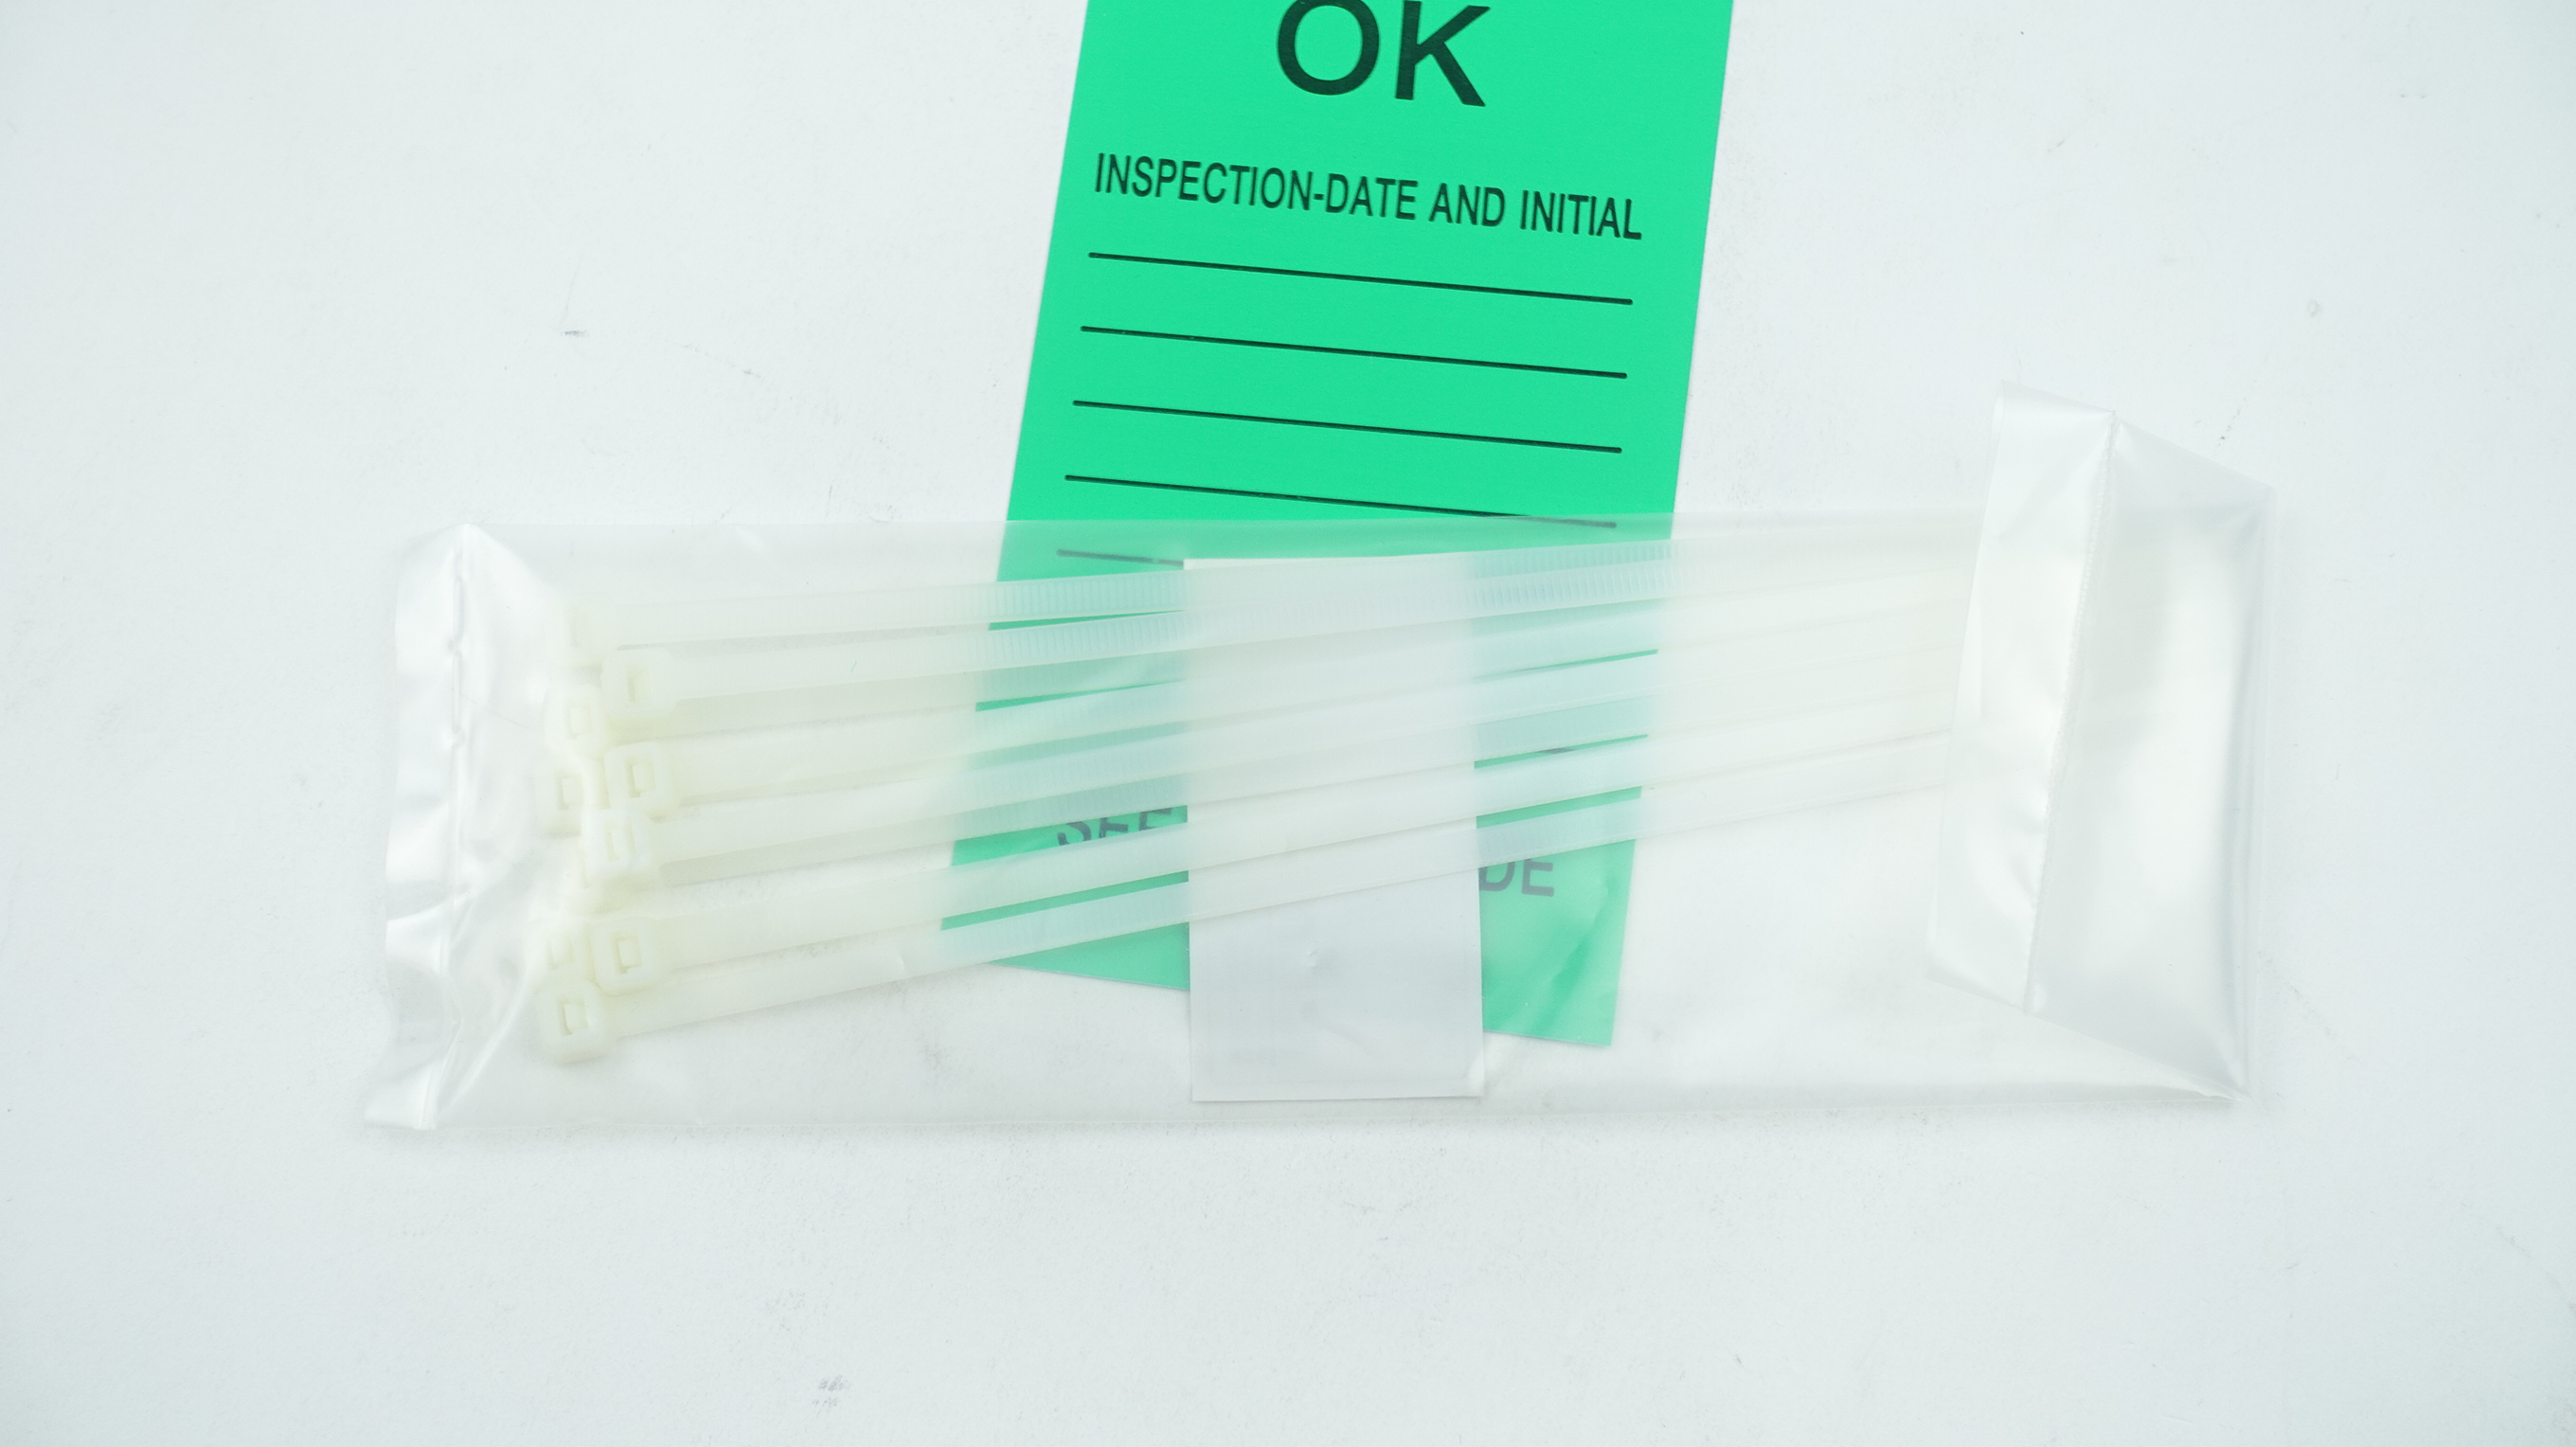 12 Packs of 10 Tags 86572 Brady Scaffolding Green with Zip Ties 120 Tags Total - image 4